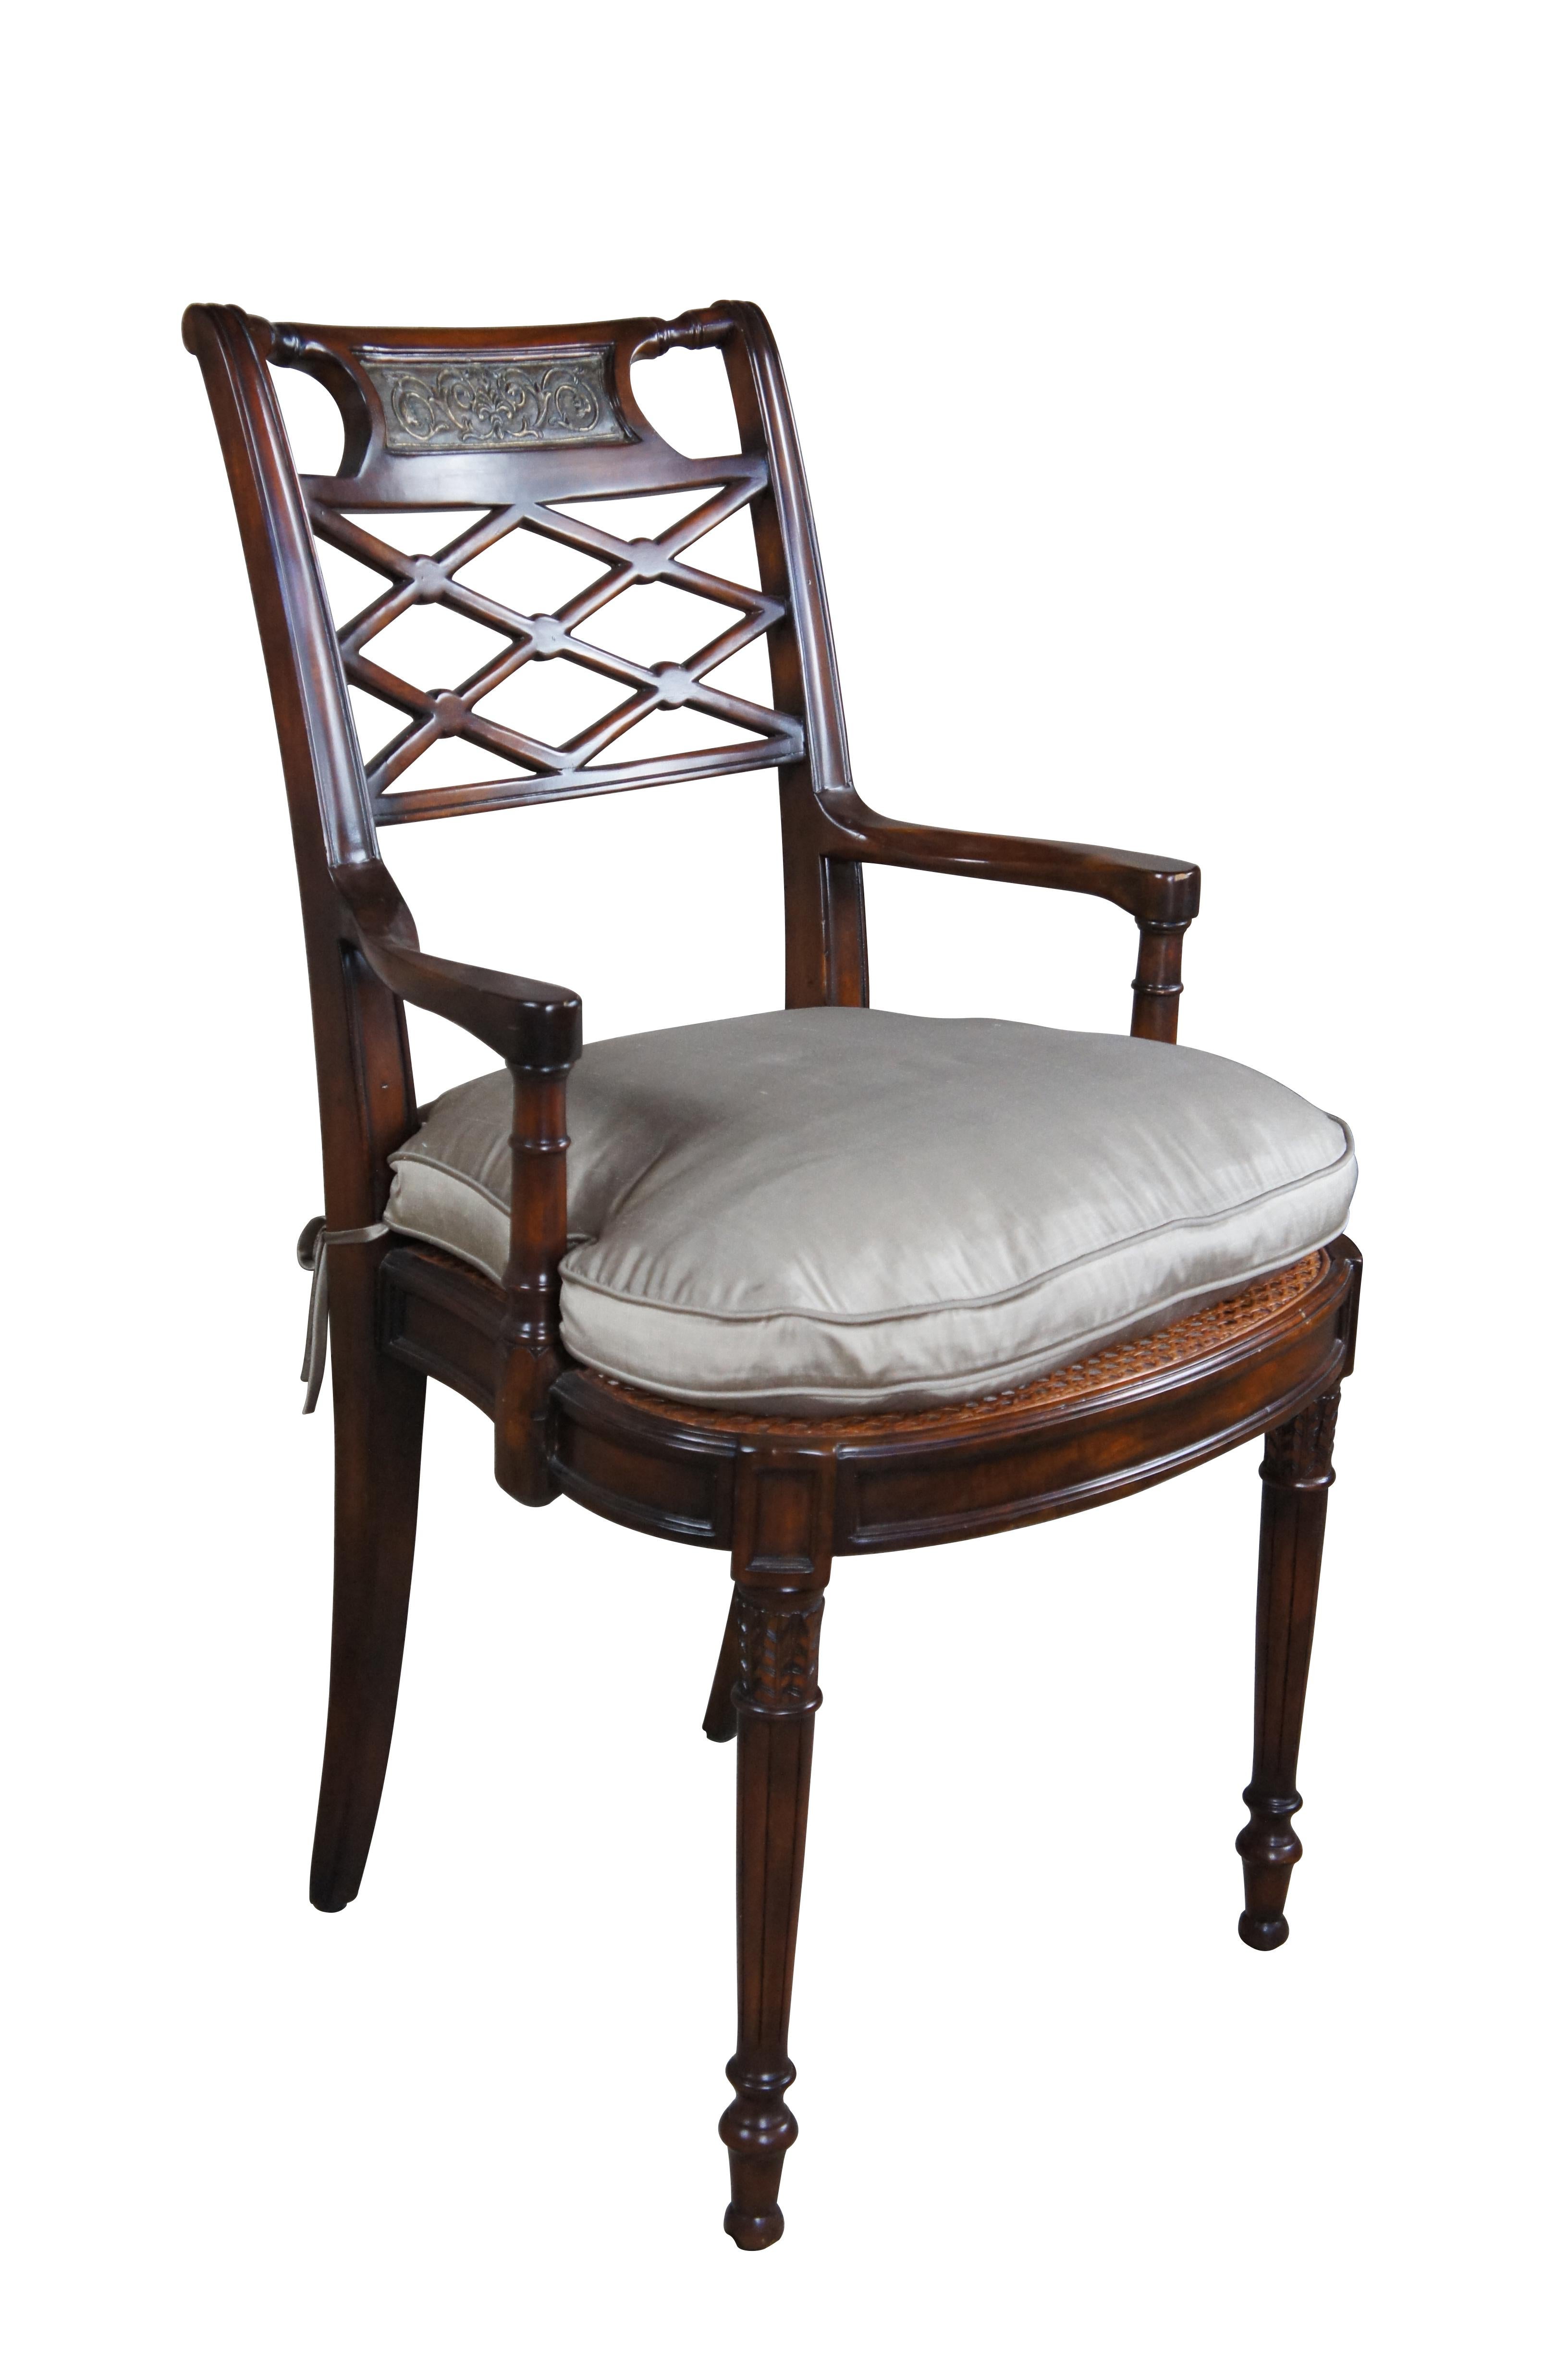 Theodore Alexander Adorned with Silk Bows Side Chair, 4100-236.  A hand carved armchair, the bar toprail inset with a 'bronzed' repoussé plaque above a lattice pierced back, on a caned seat with a tie-on cushion, flanked by recessed arms, on turned